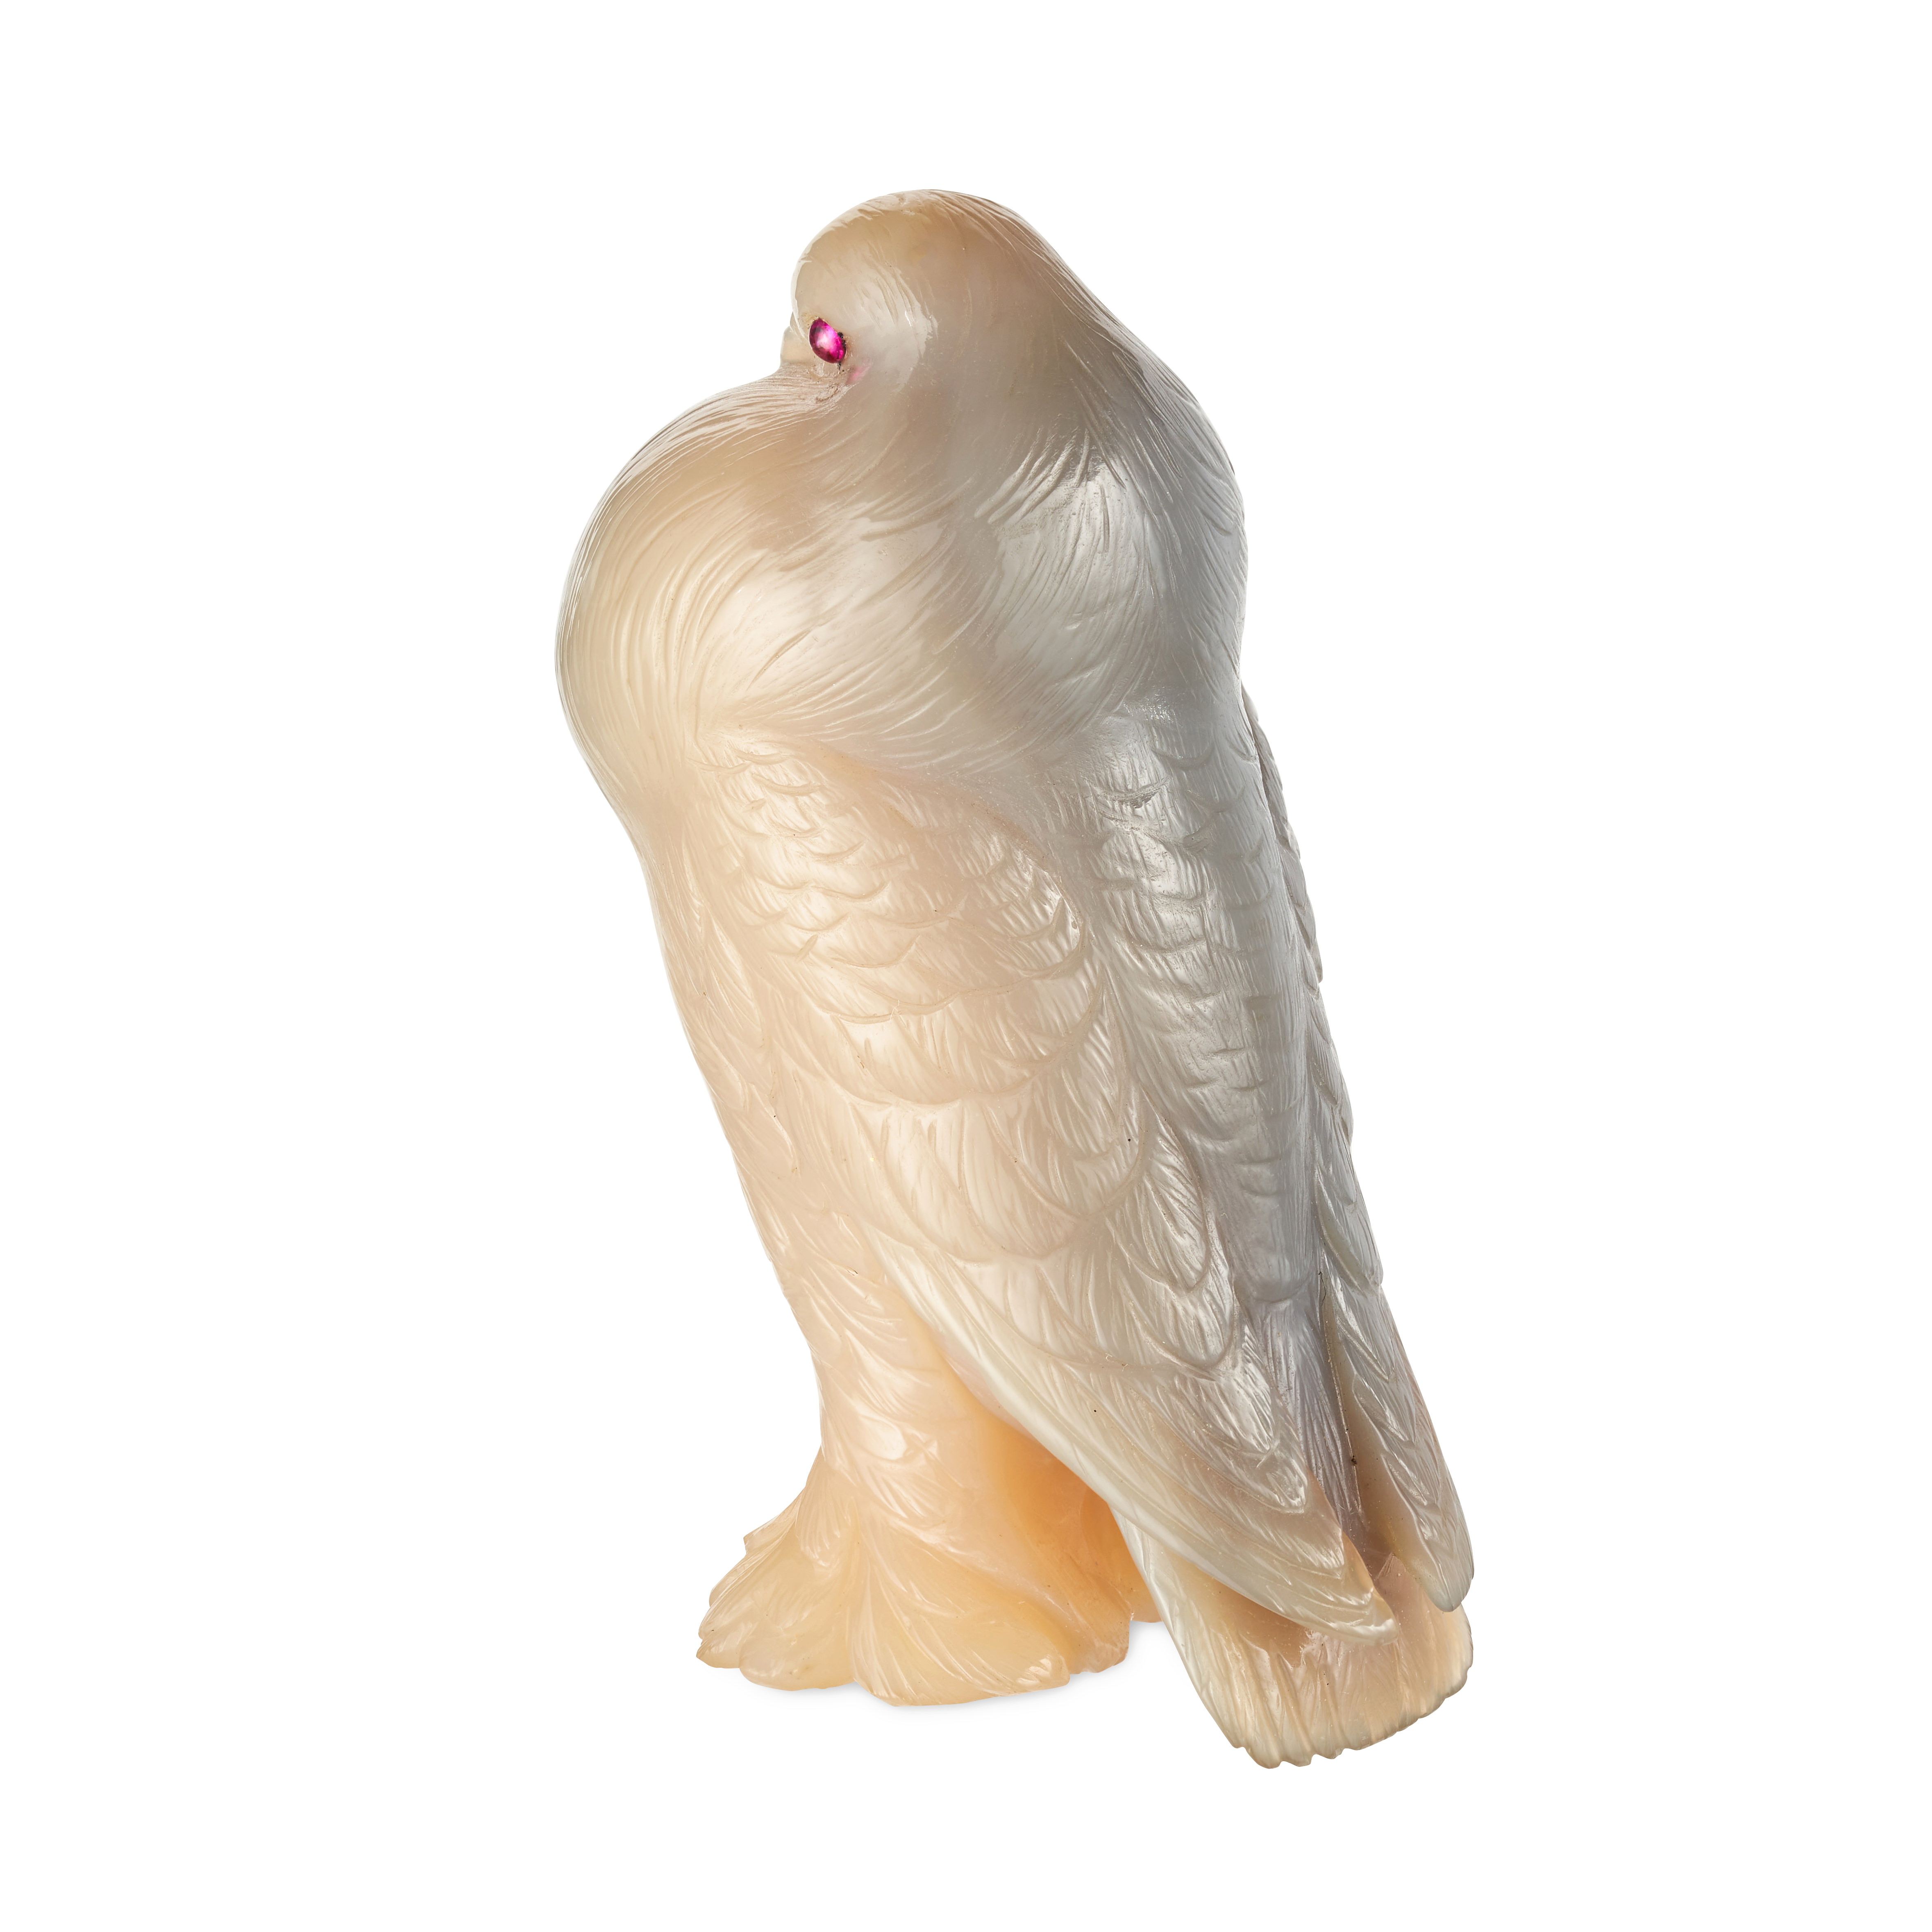 FABERGE, AN IMPORTANT JEWELLED CHALCEDONY MODEL OF A POUTER PIGEON, ST PETERSBURG CIRCA 1900 - Image 6 of 12